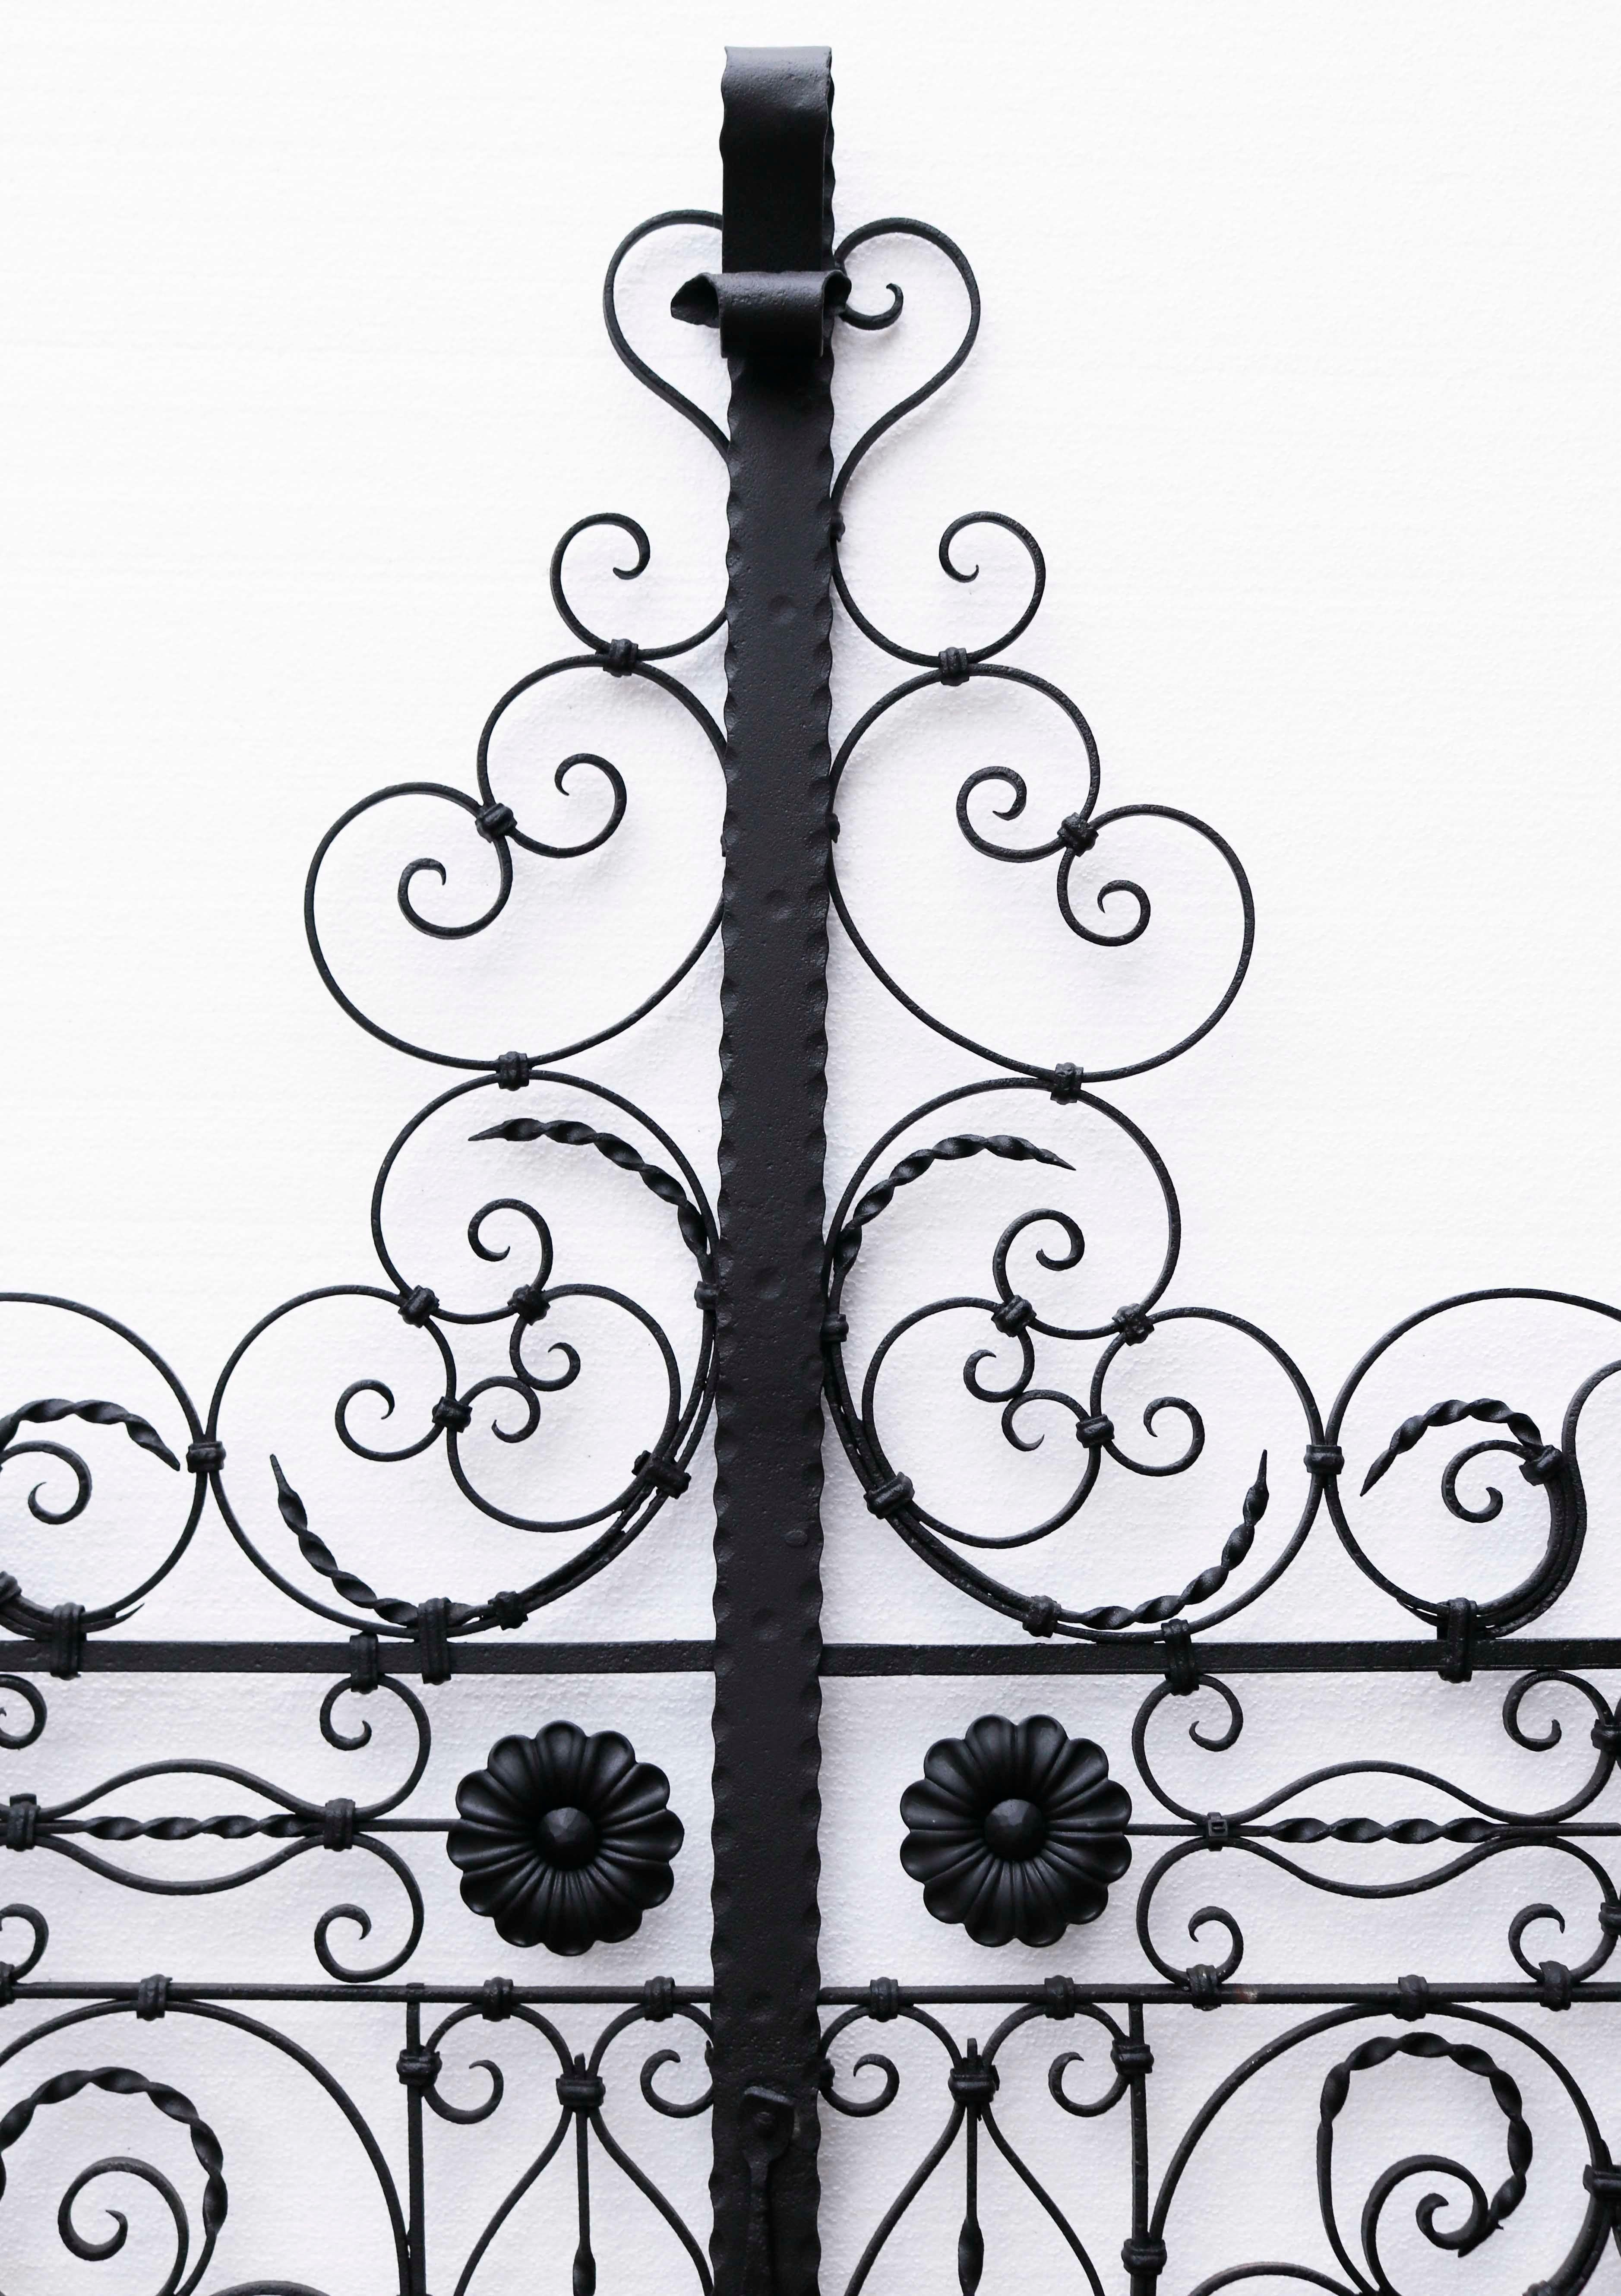 Pair of Ornate Antique Wrought Iron Gates In Good Condition For Sale In Wormelow, Herefordshire